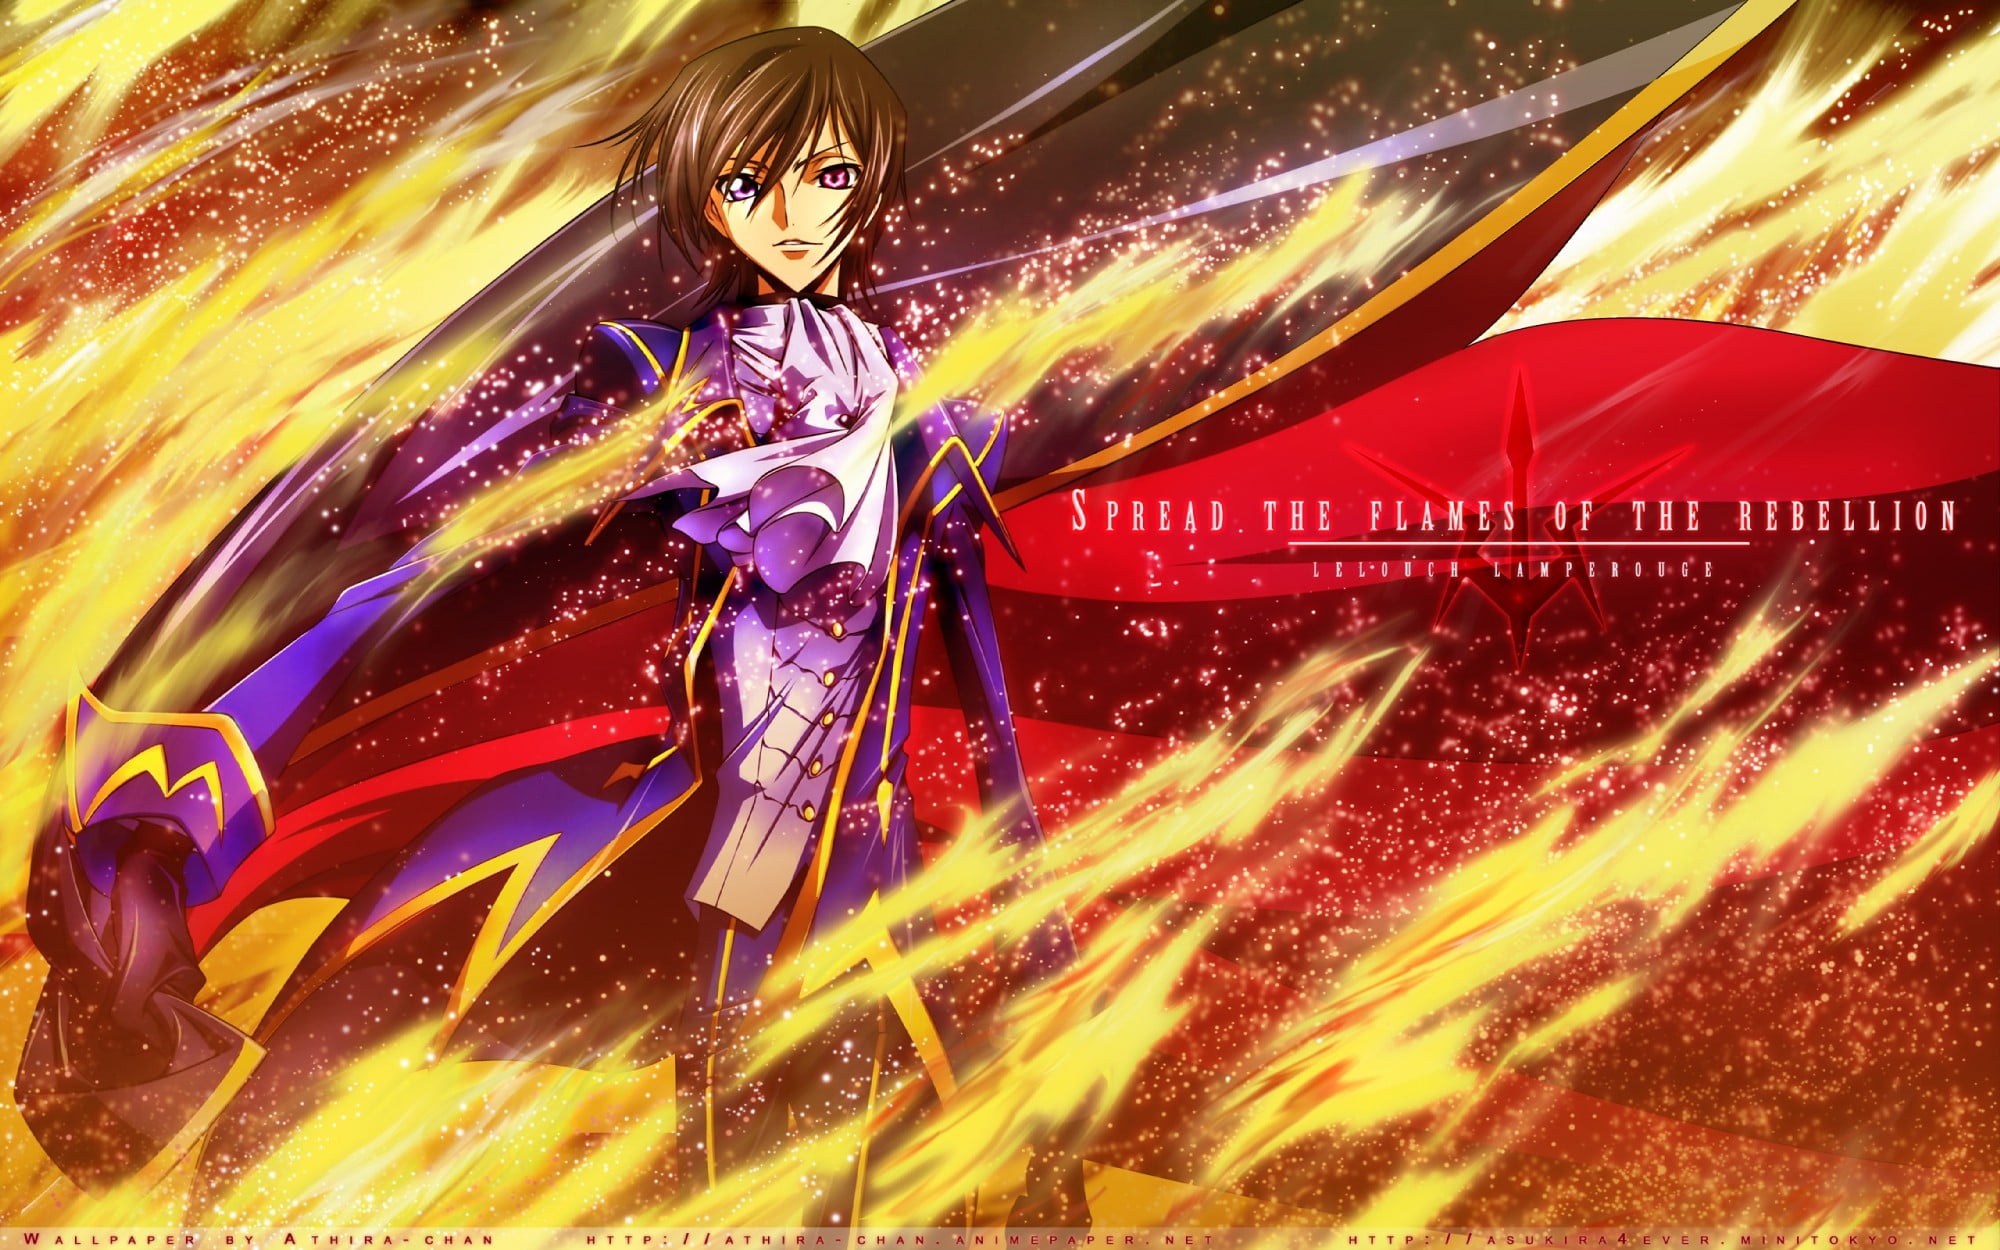 Spread The Flames Of The Rebellion Illustration Code Geass Lamperouge Lelouch Zero Anime Hd Wallpaper Wallpaper Flare